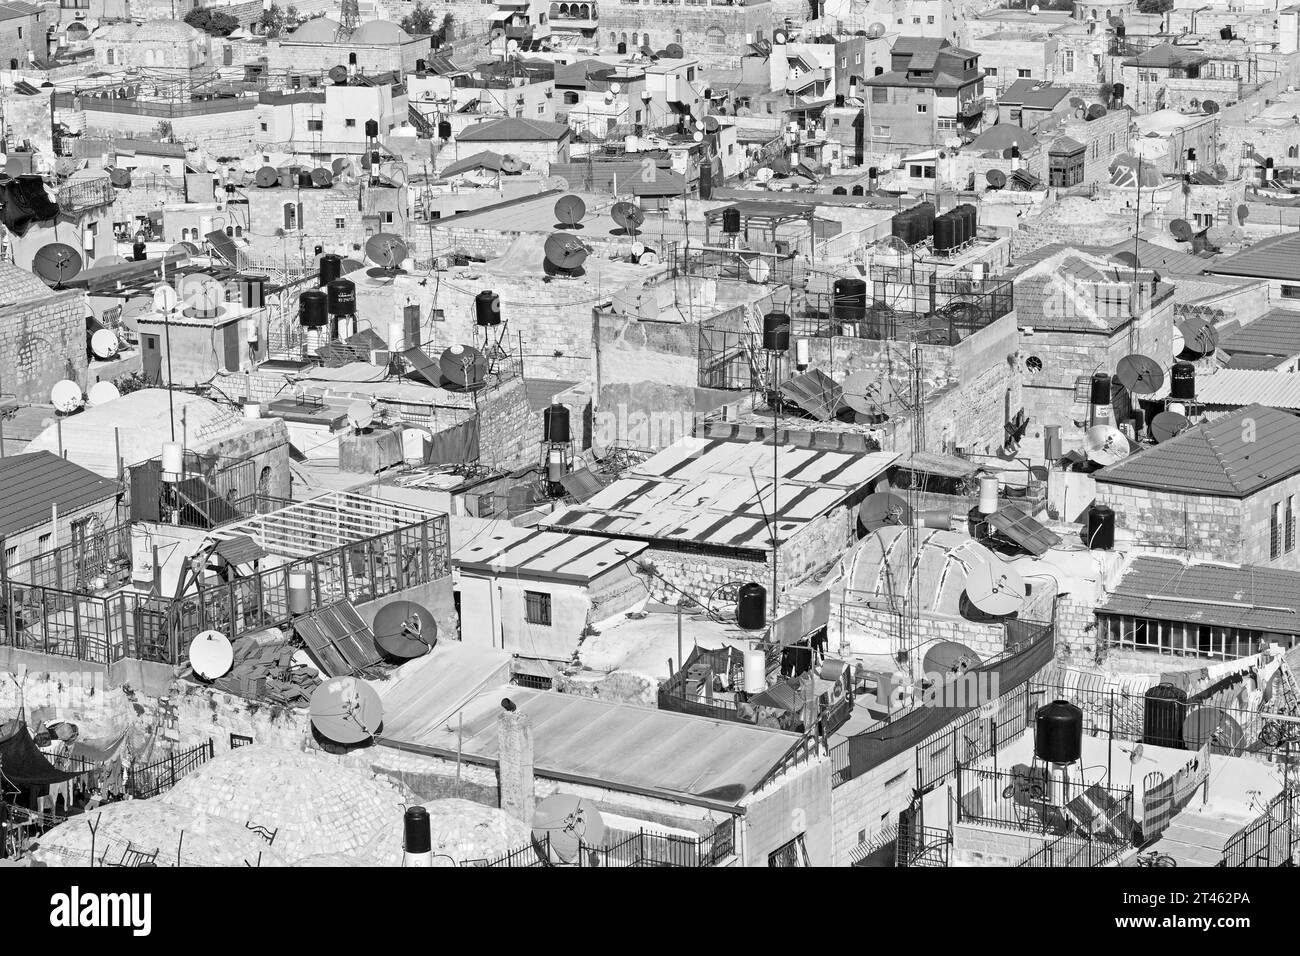 JERUSALEM, ISRAEL - MARCH 5, 2015: The roofs of old town from the Redeemer church. Stock Photo